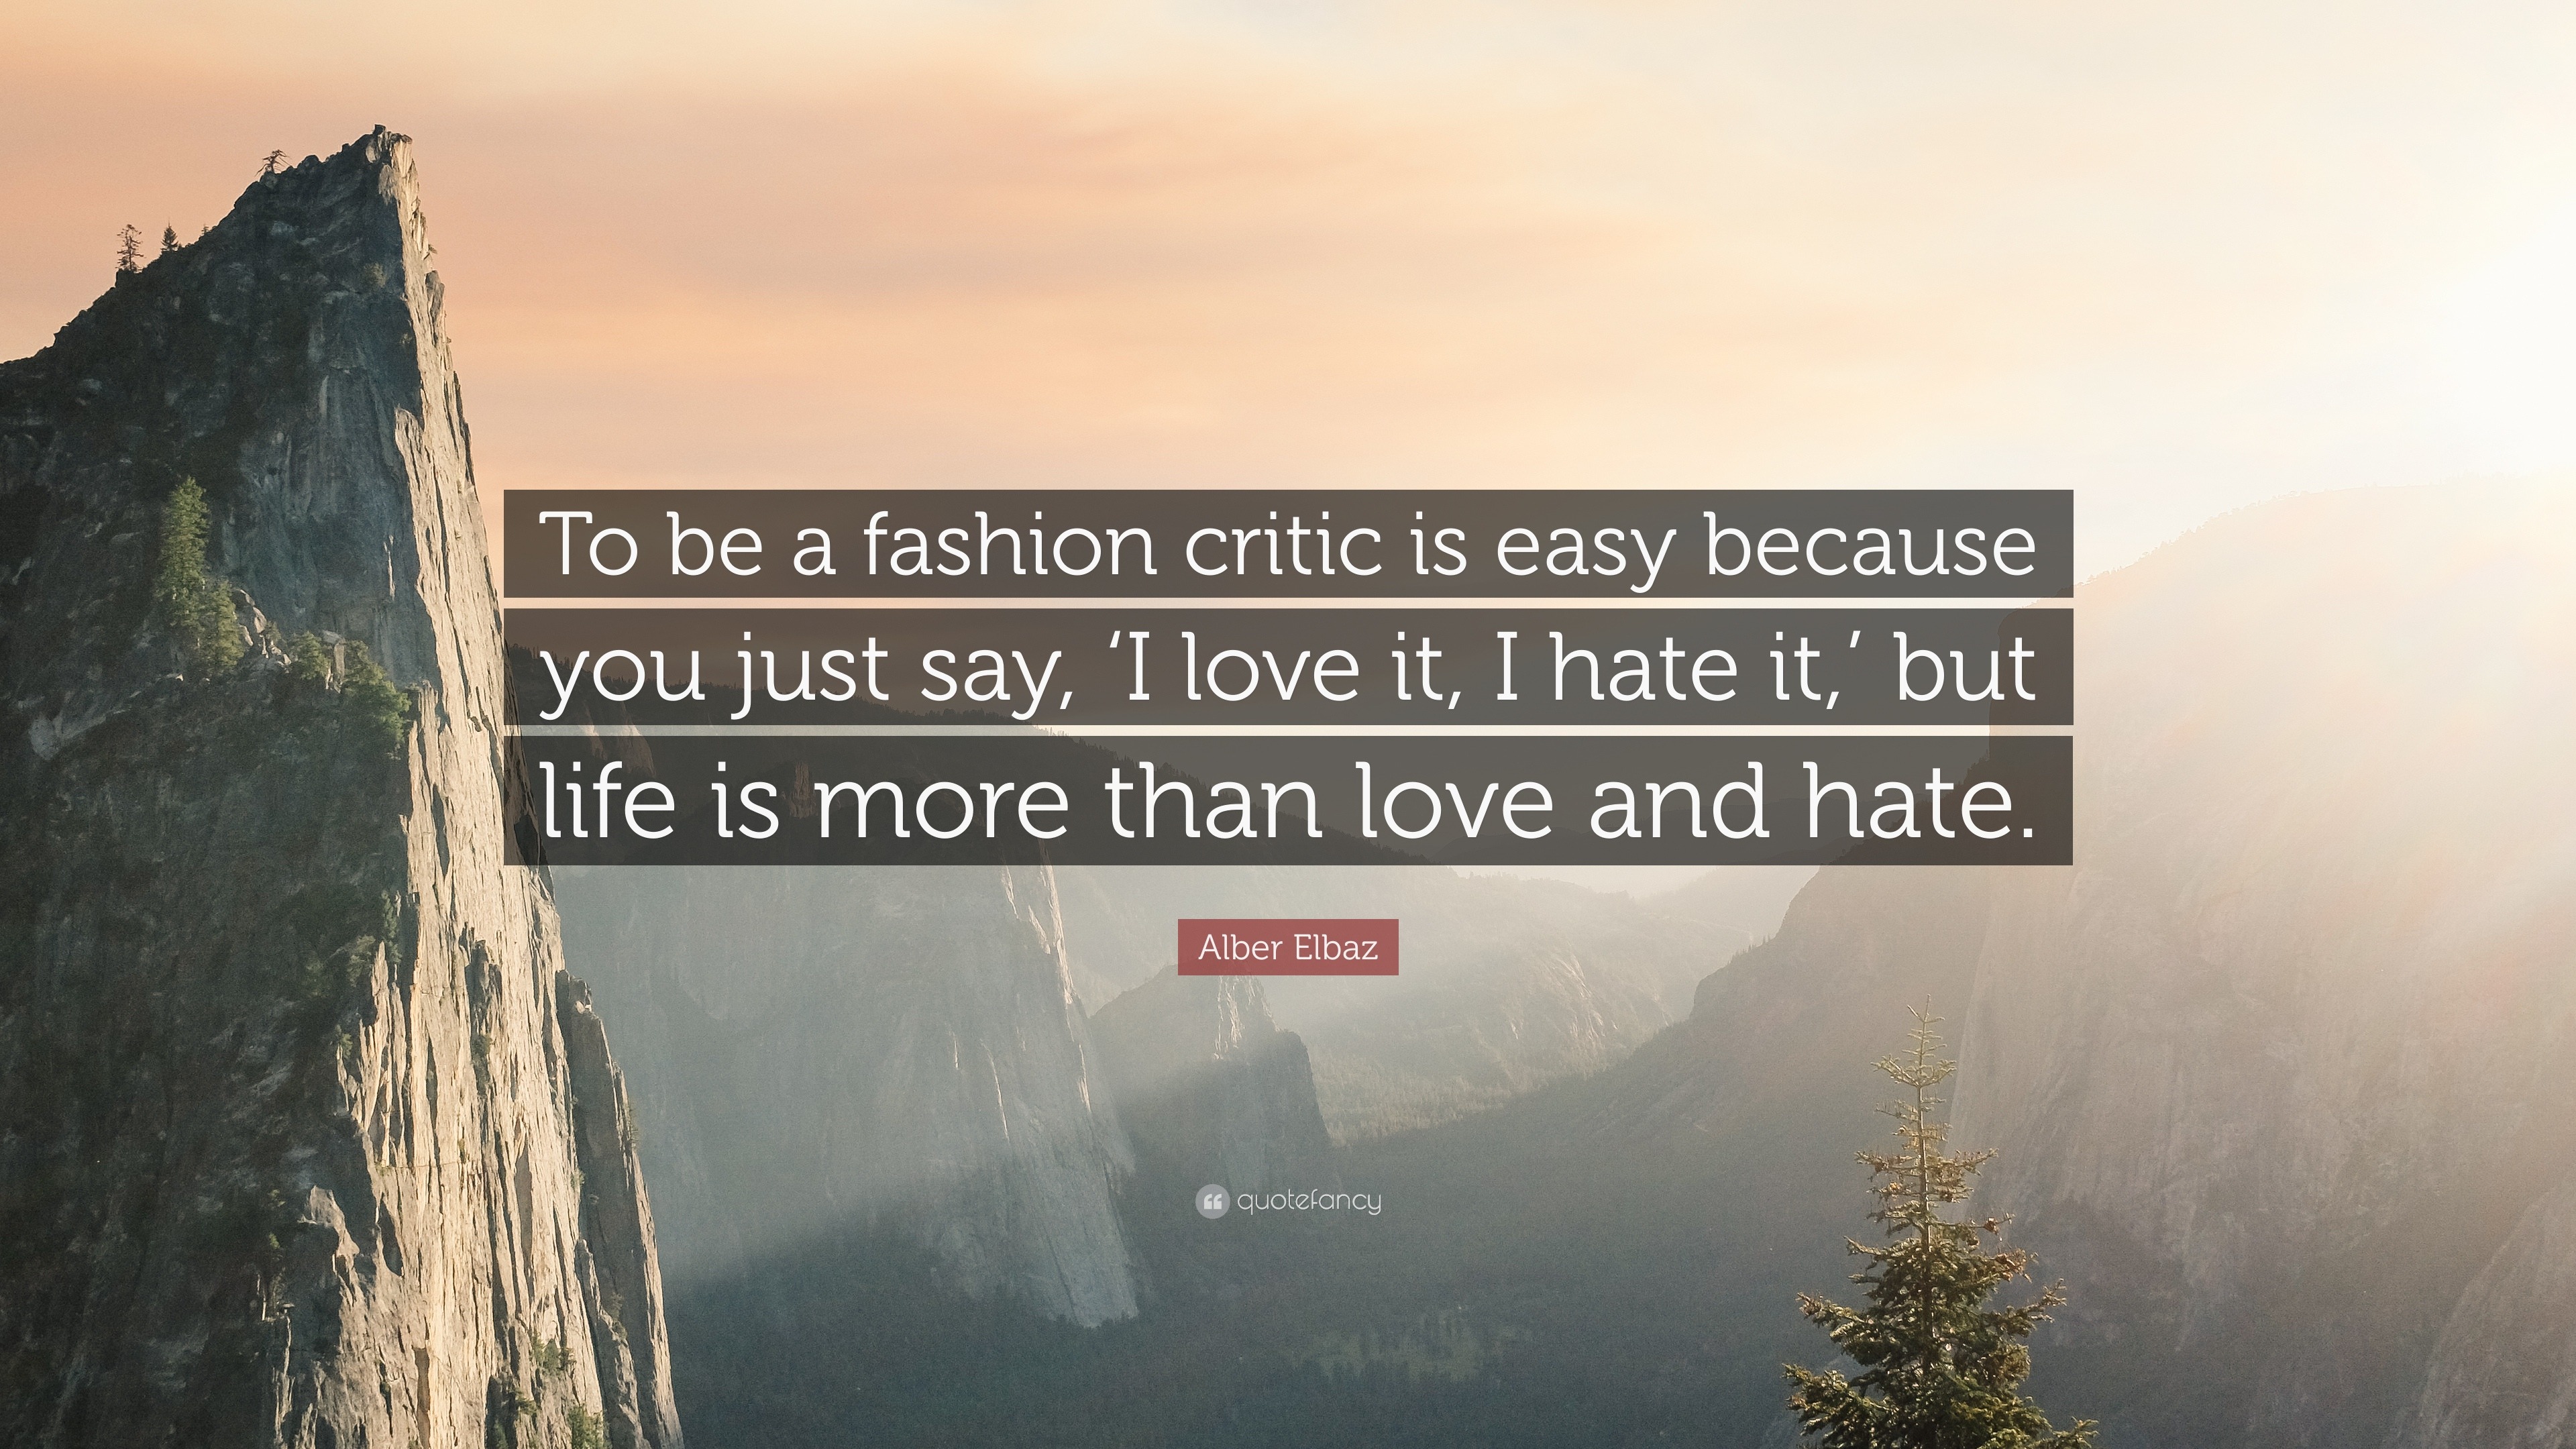 Alber Elbaz Quote “To be a fashion critic is easy because you just say